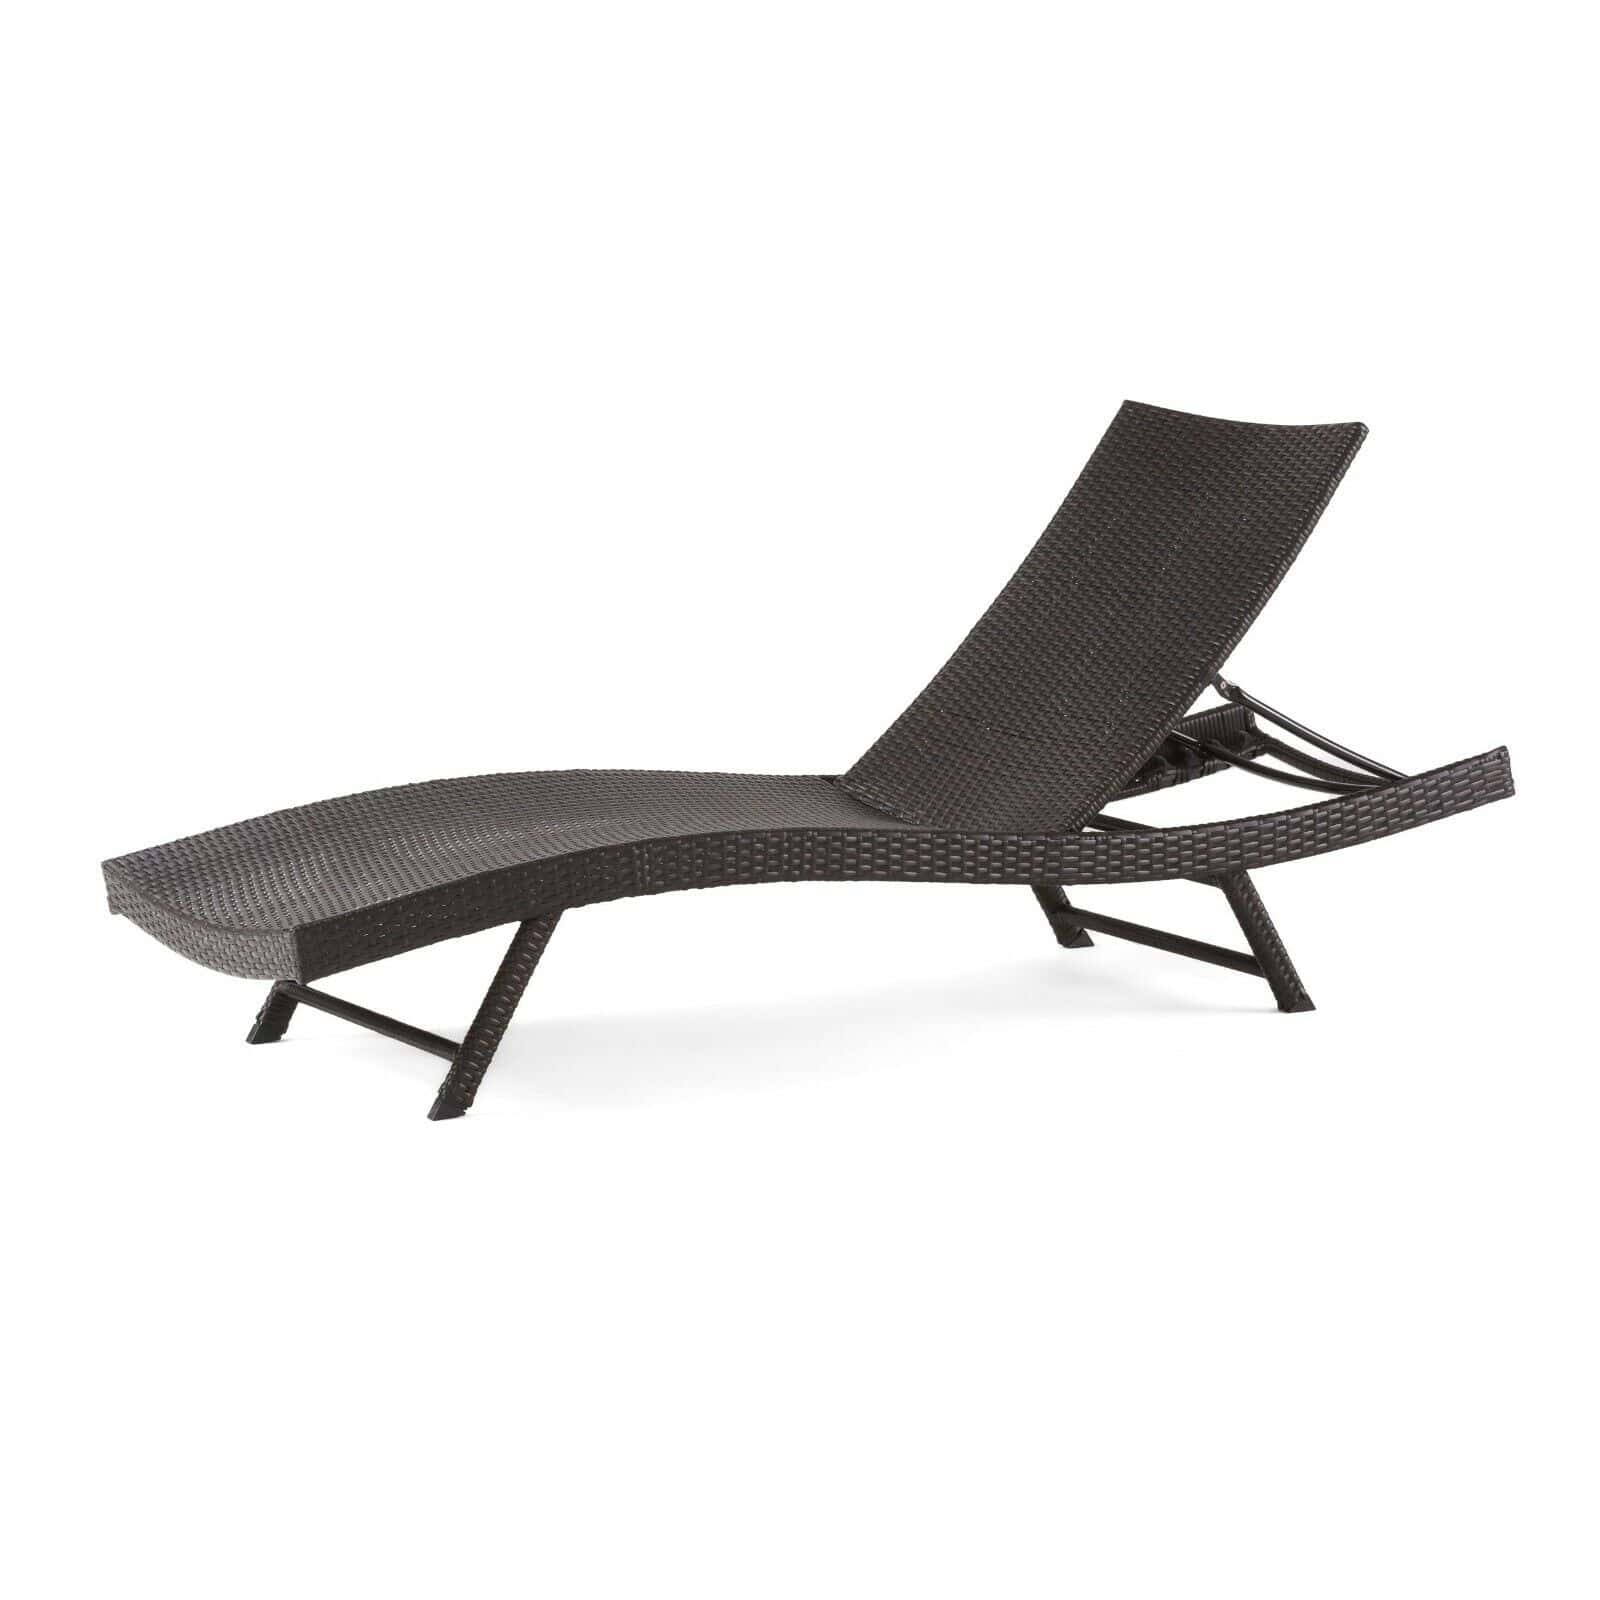 A black rattan chaise lounger on a white background.